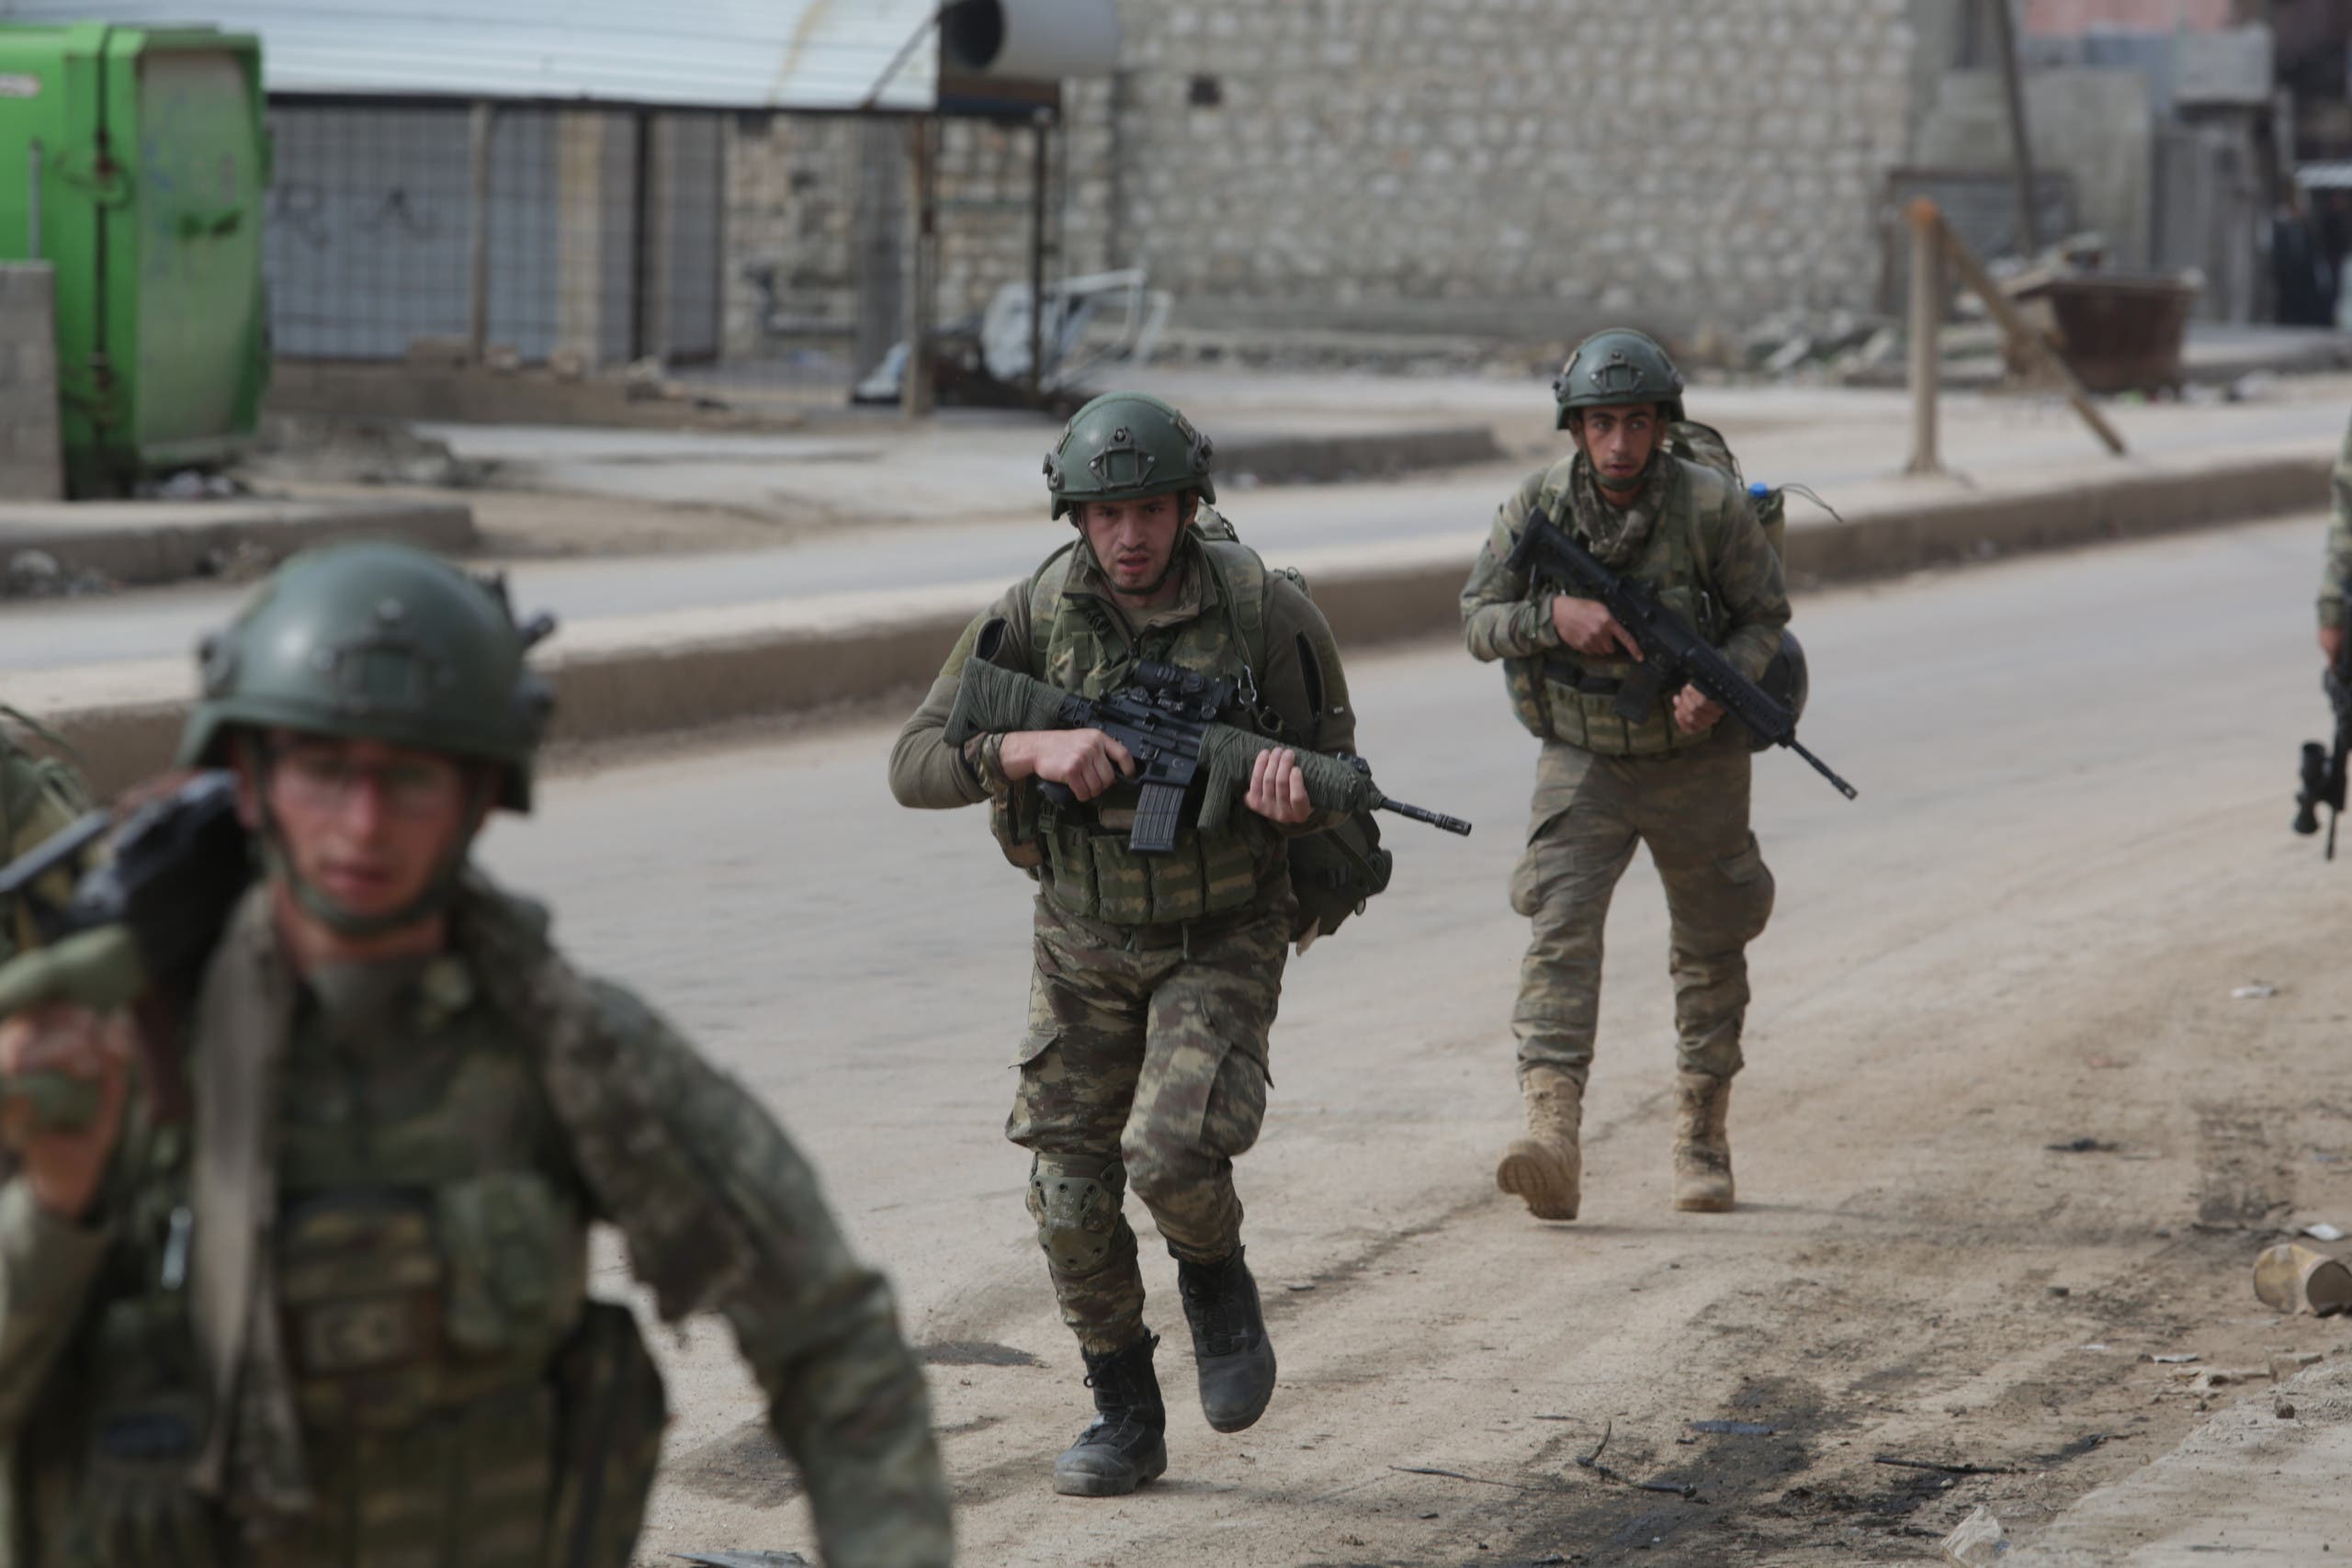 Turkish troops patrol in the town of Atareb in the opposition-held western countryside of Syria's Aleppo province on February 19, 2020. (AFP)